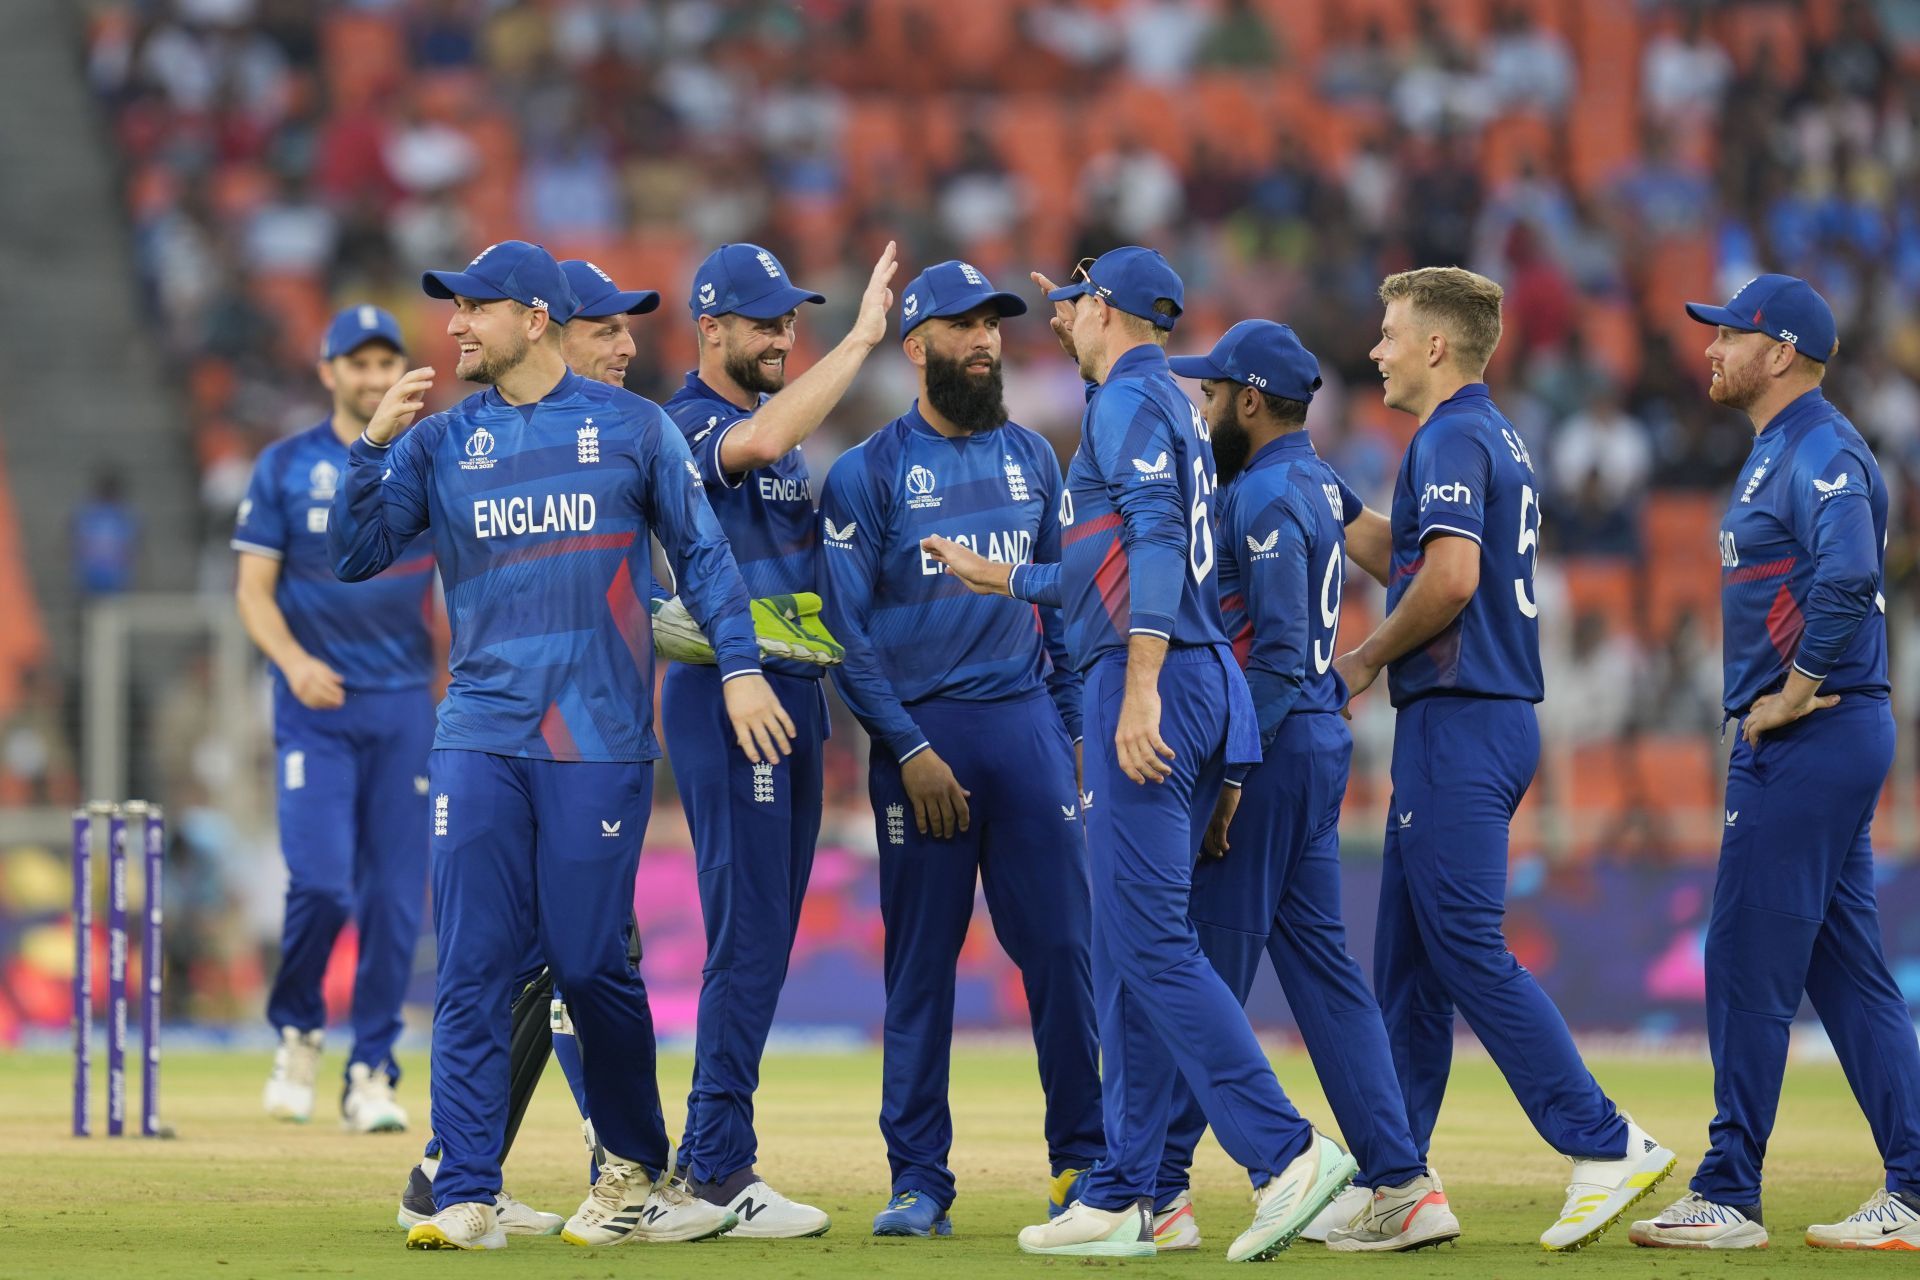 Defending champions England began their campaign with a nine-wicket loss to New Zealand. (Pic: AP)